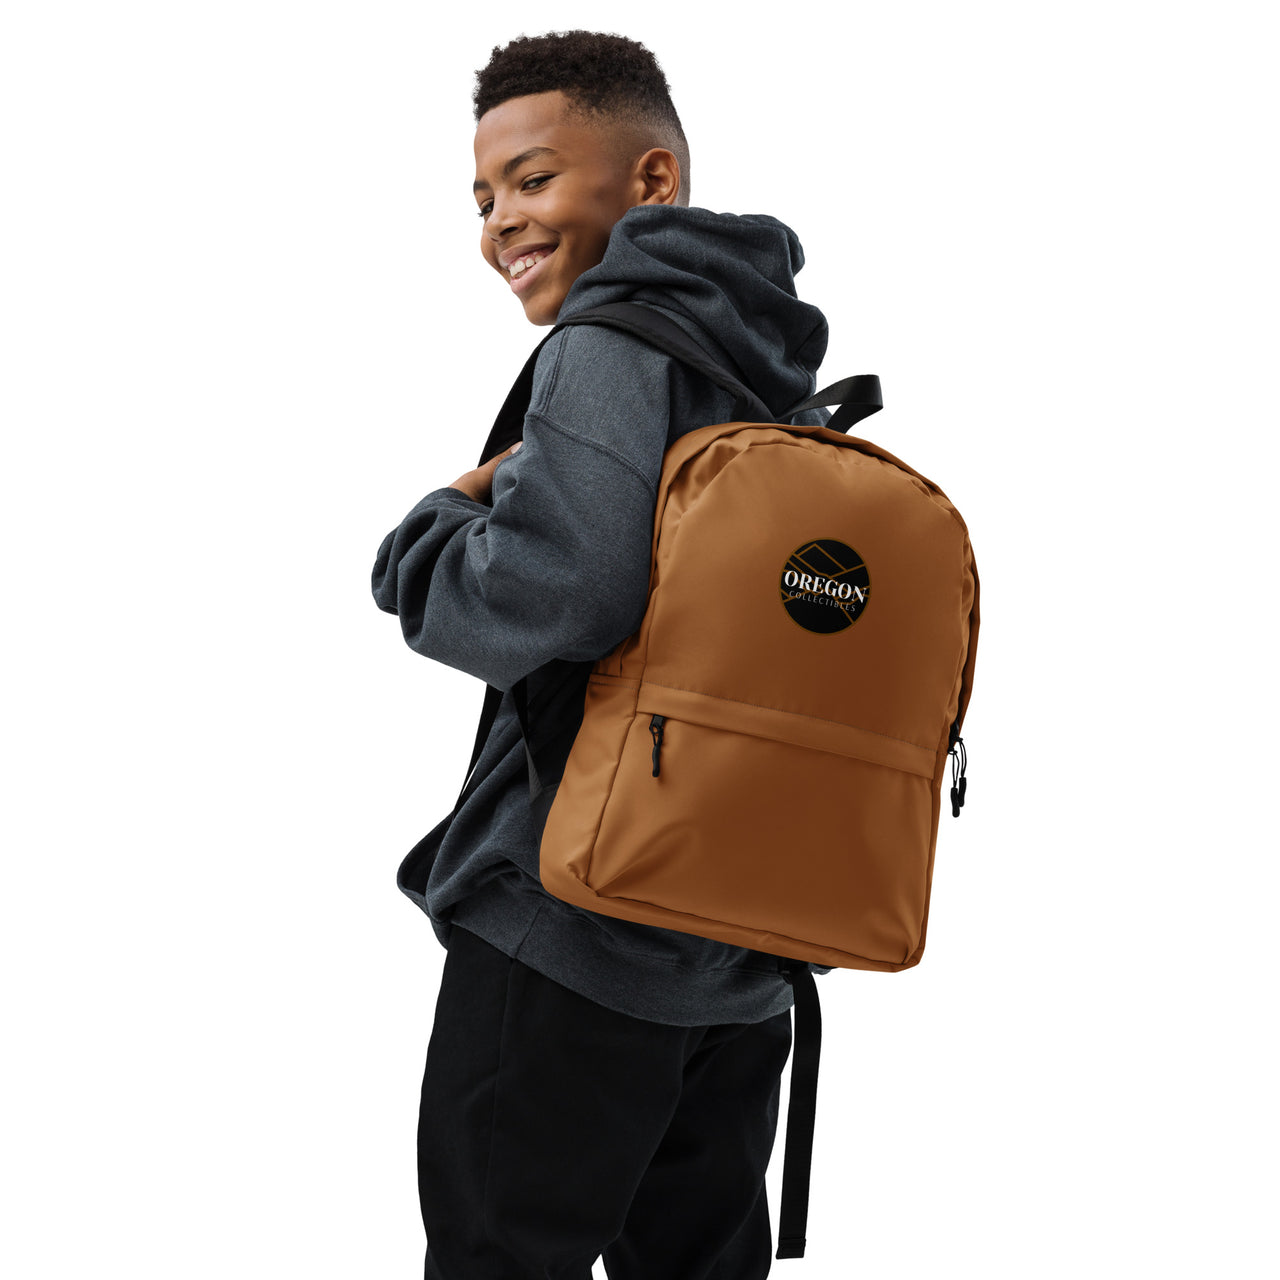 Oregon Collectibles - (Copper) - Backpack